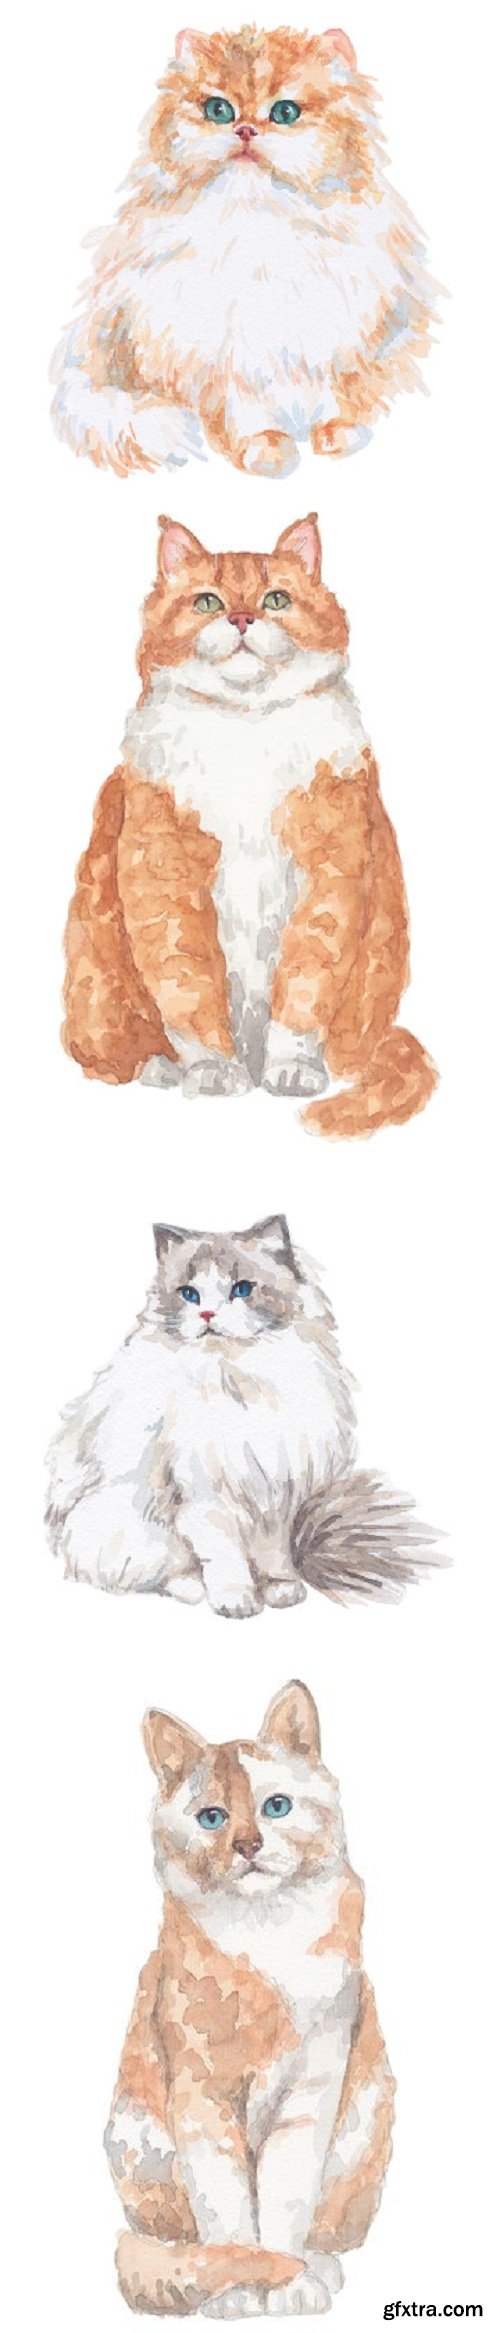 Cute cats in watercolor illustration